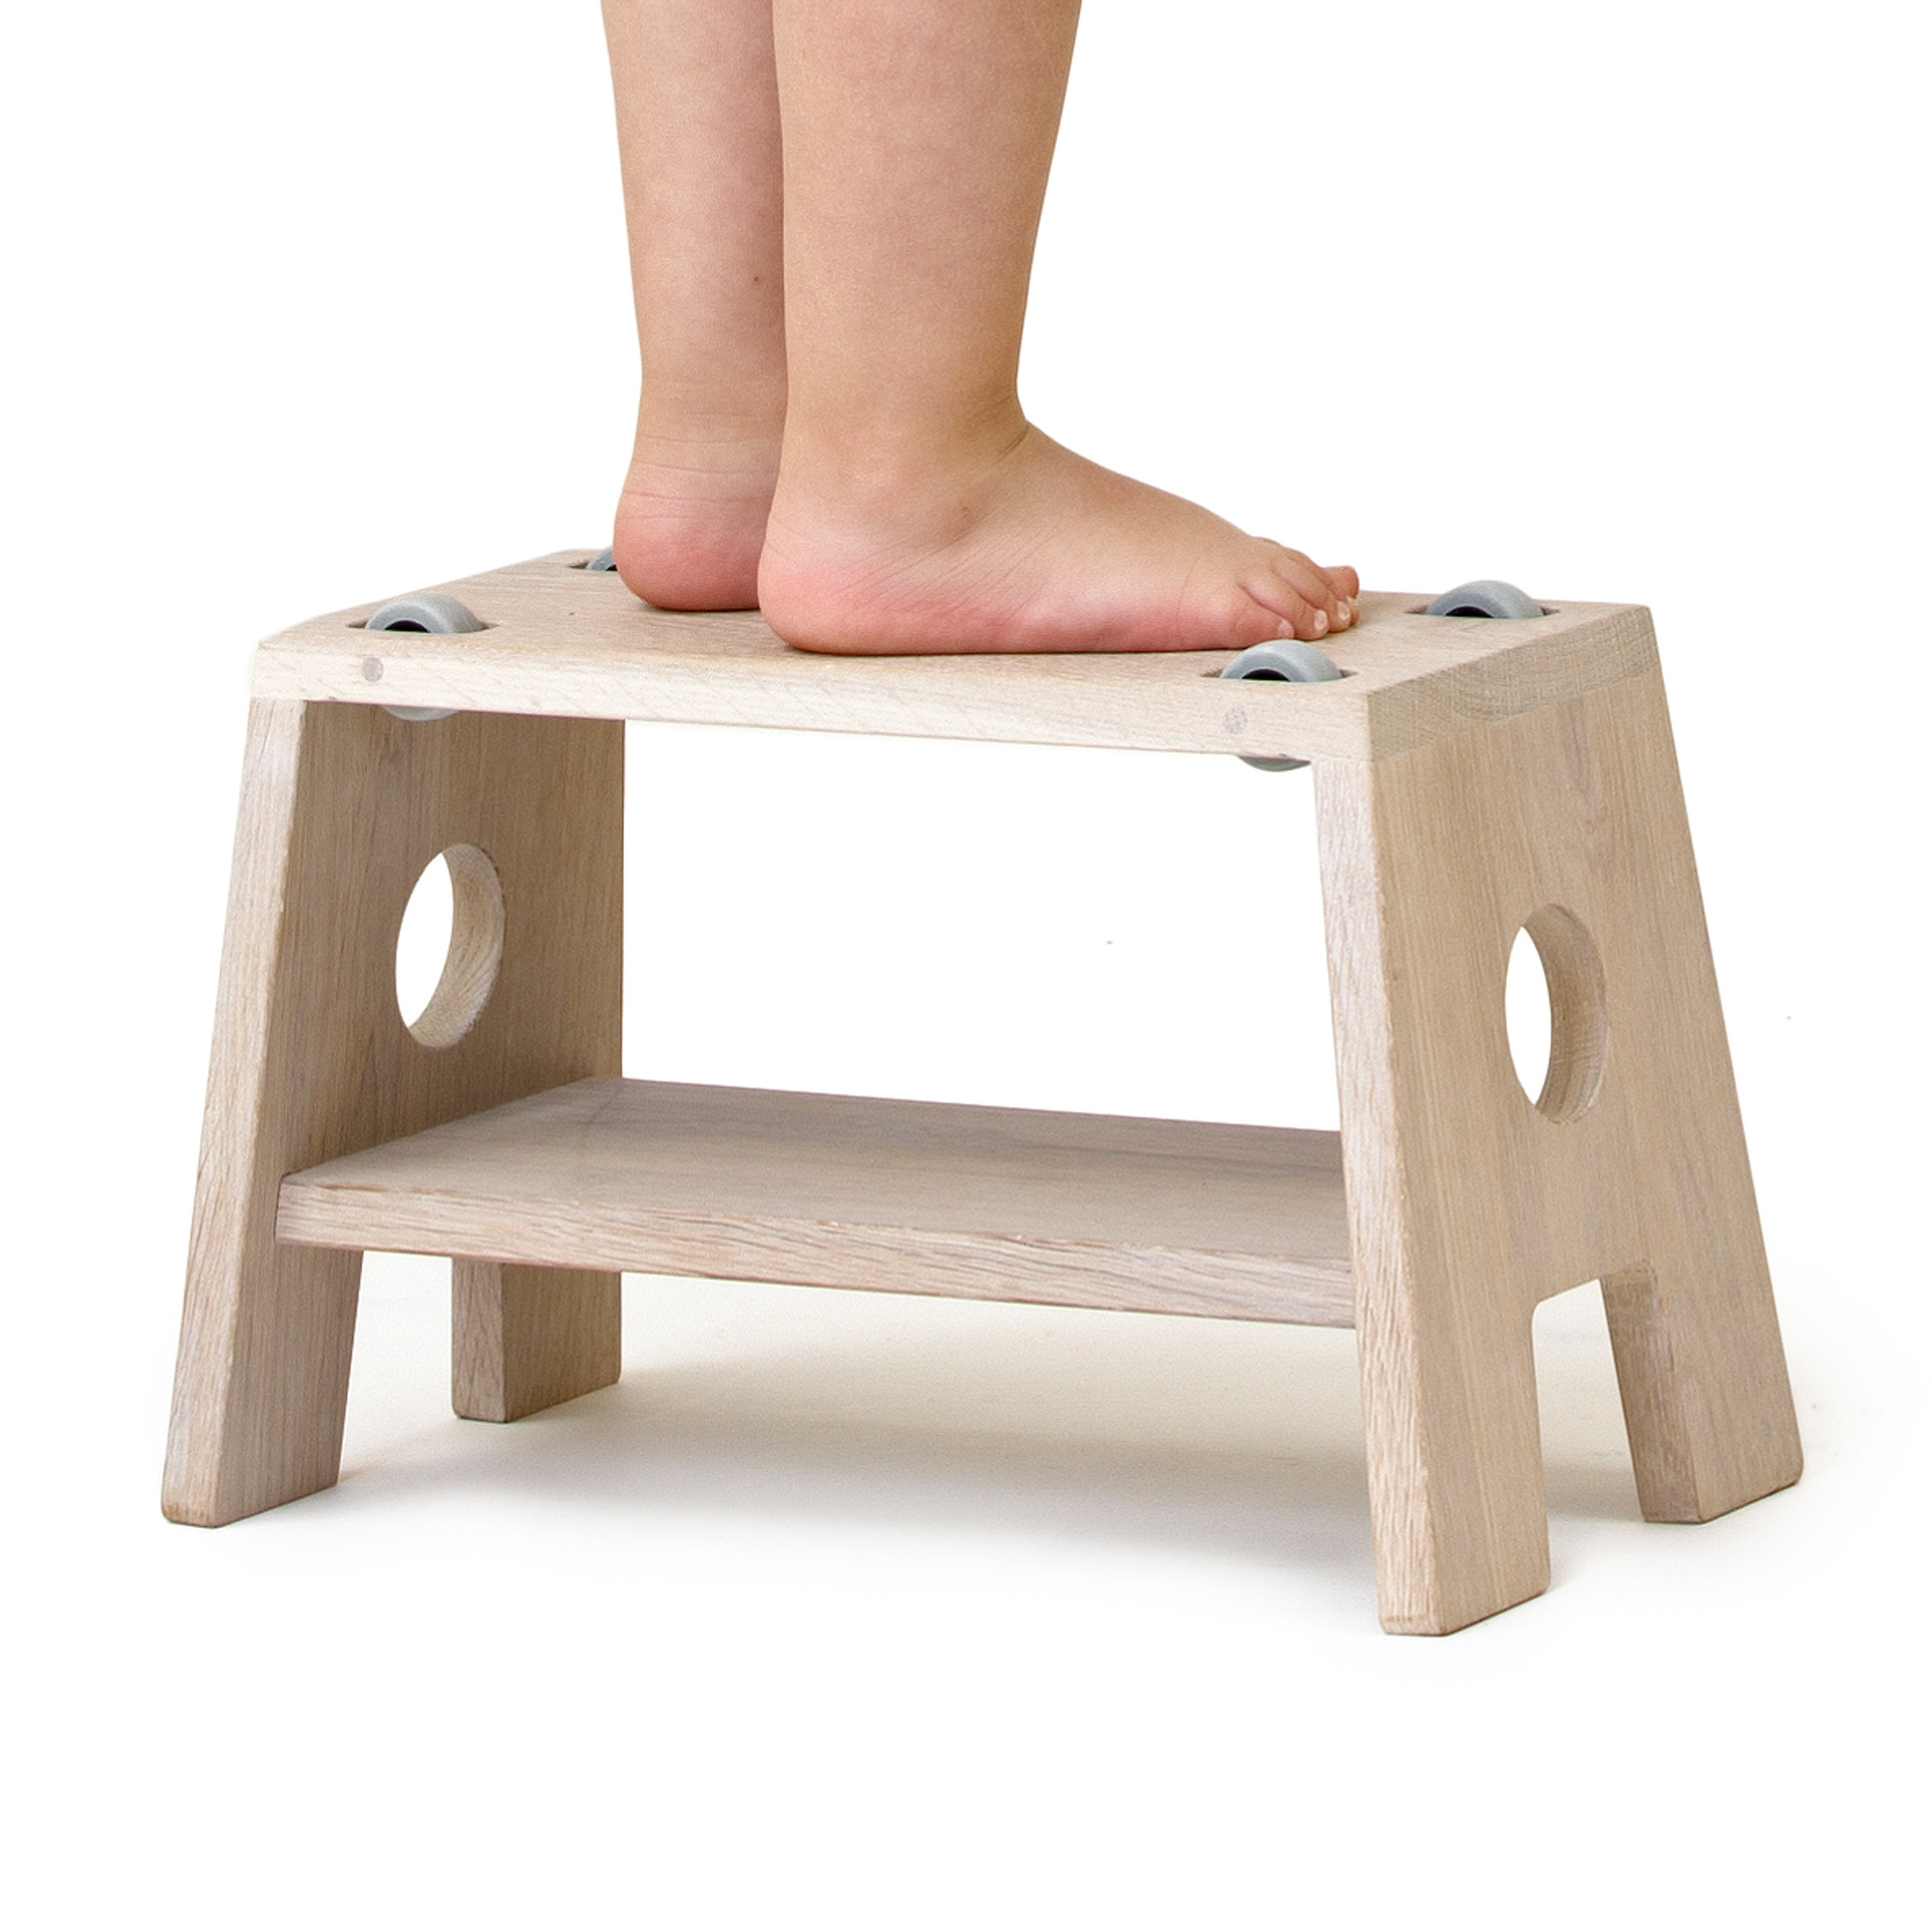 Stool - Collect furniture